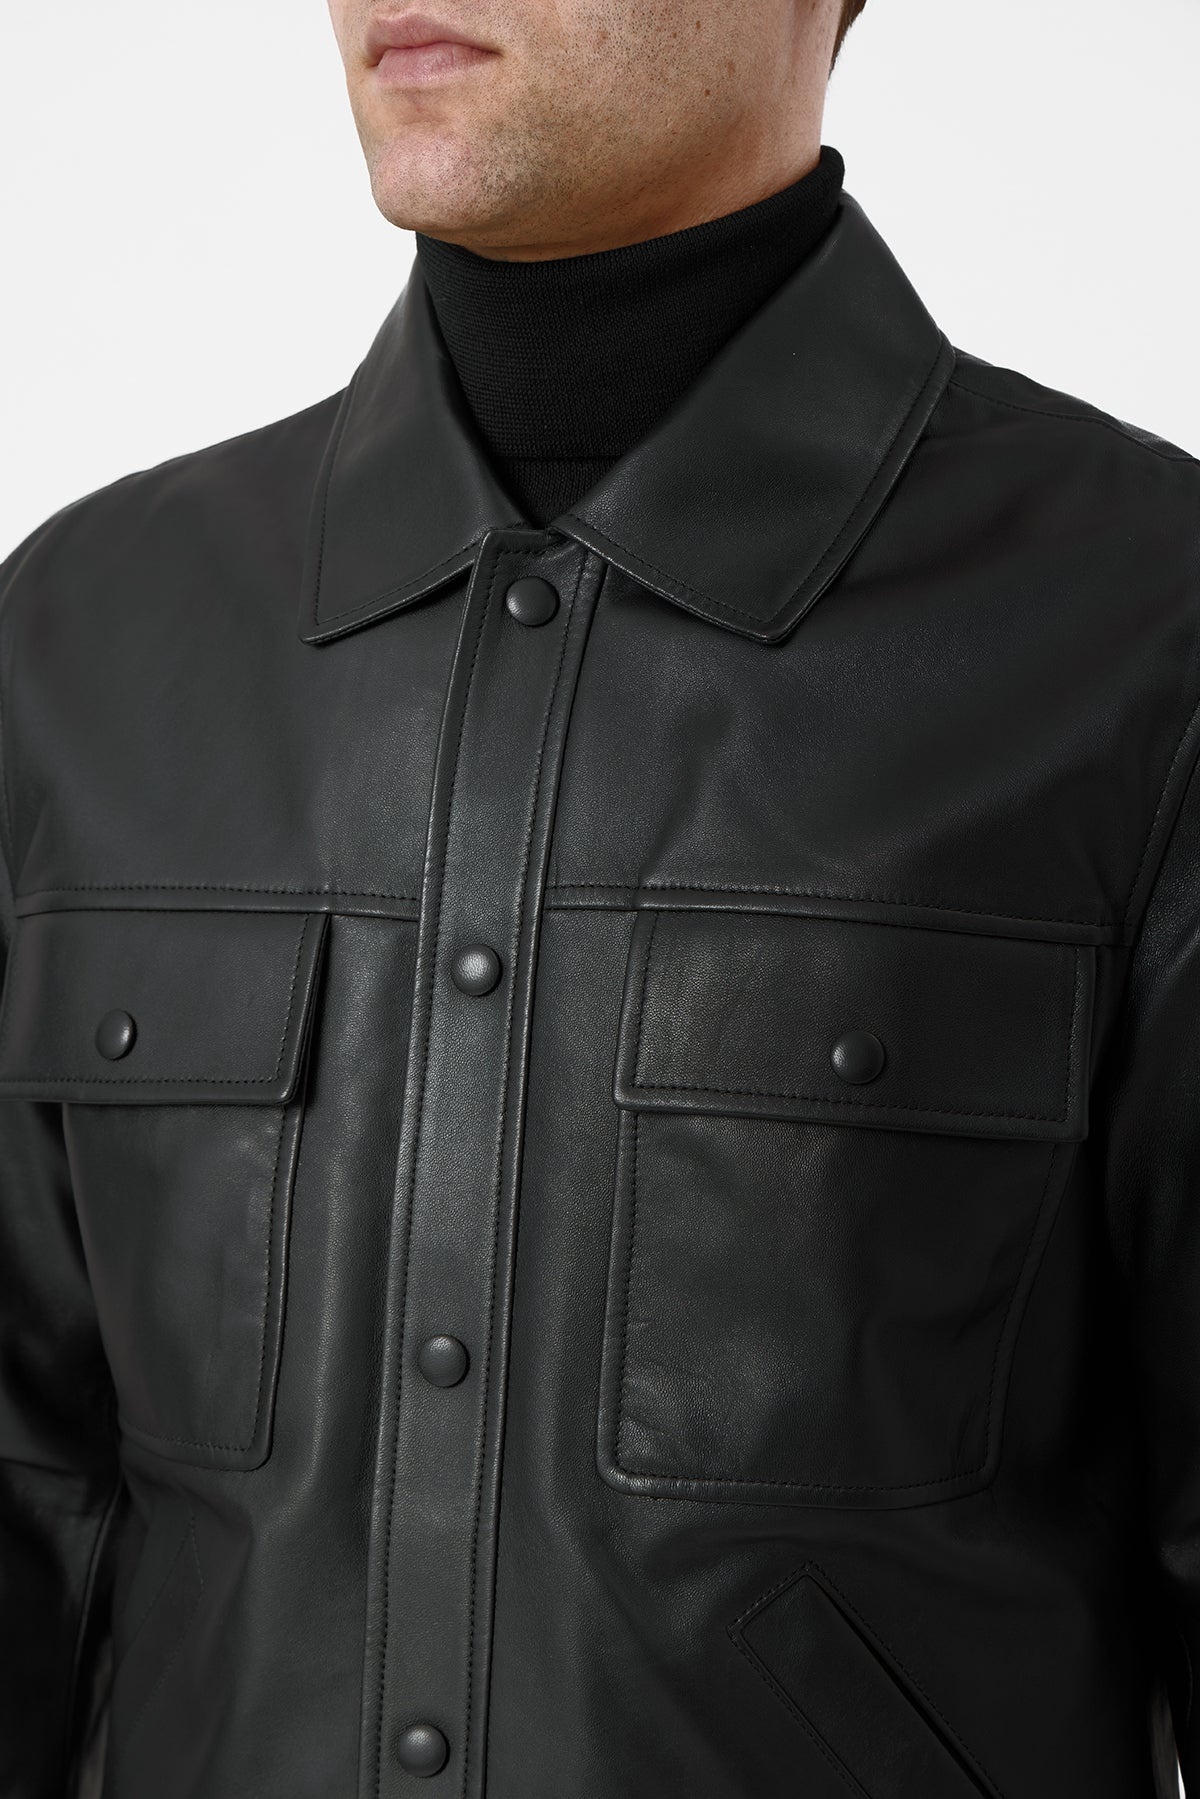 Levy Jacket in Black Nappa Leather - 4